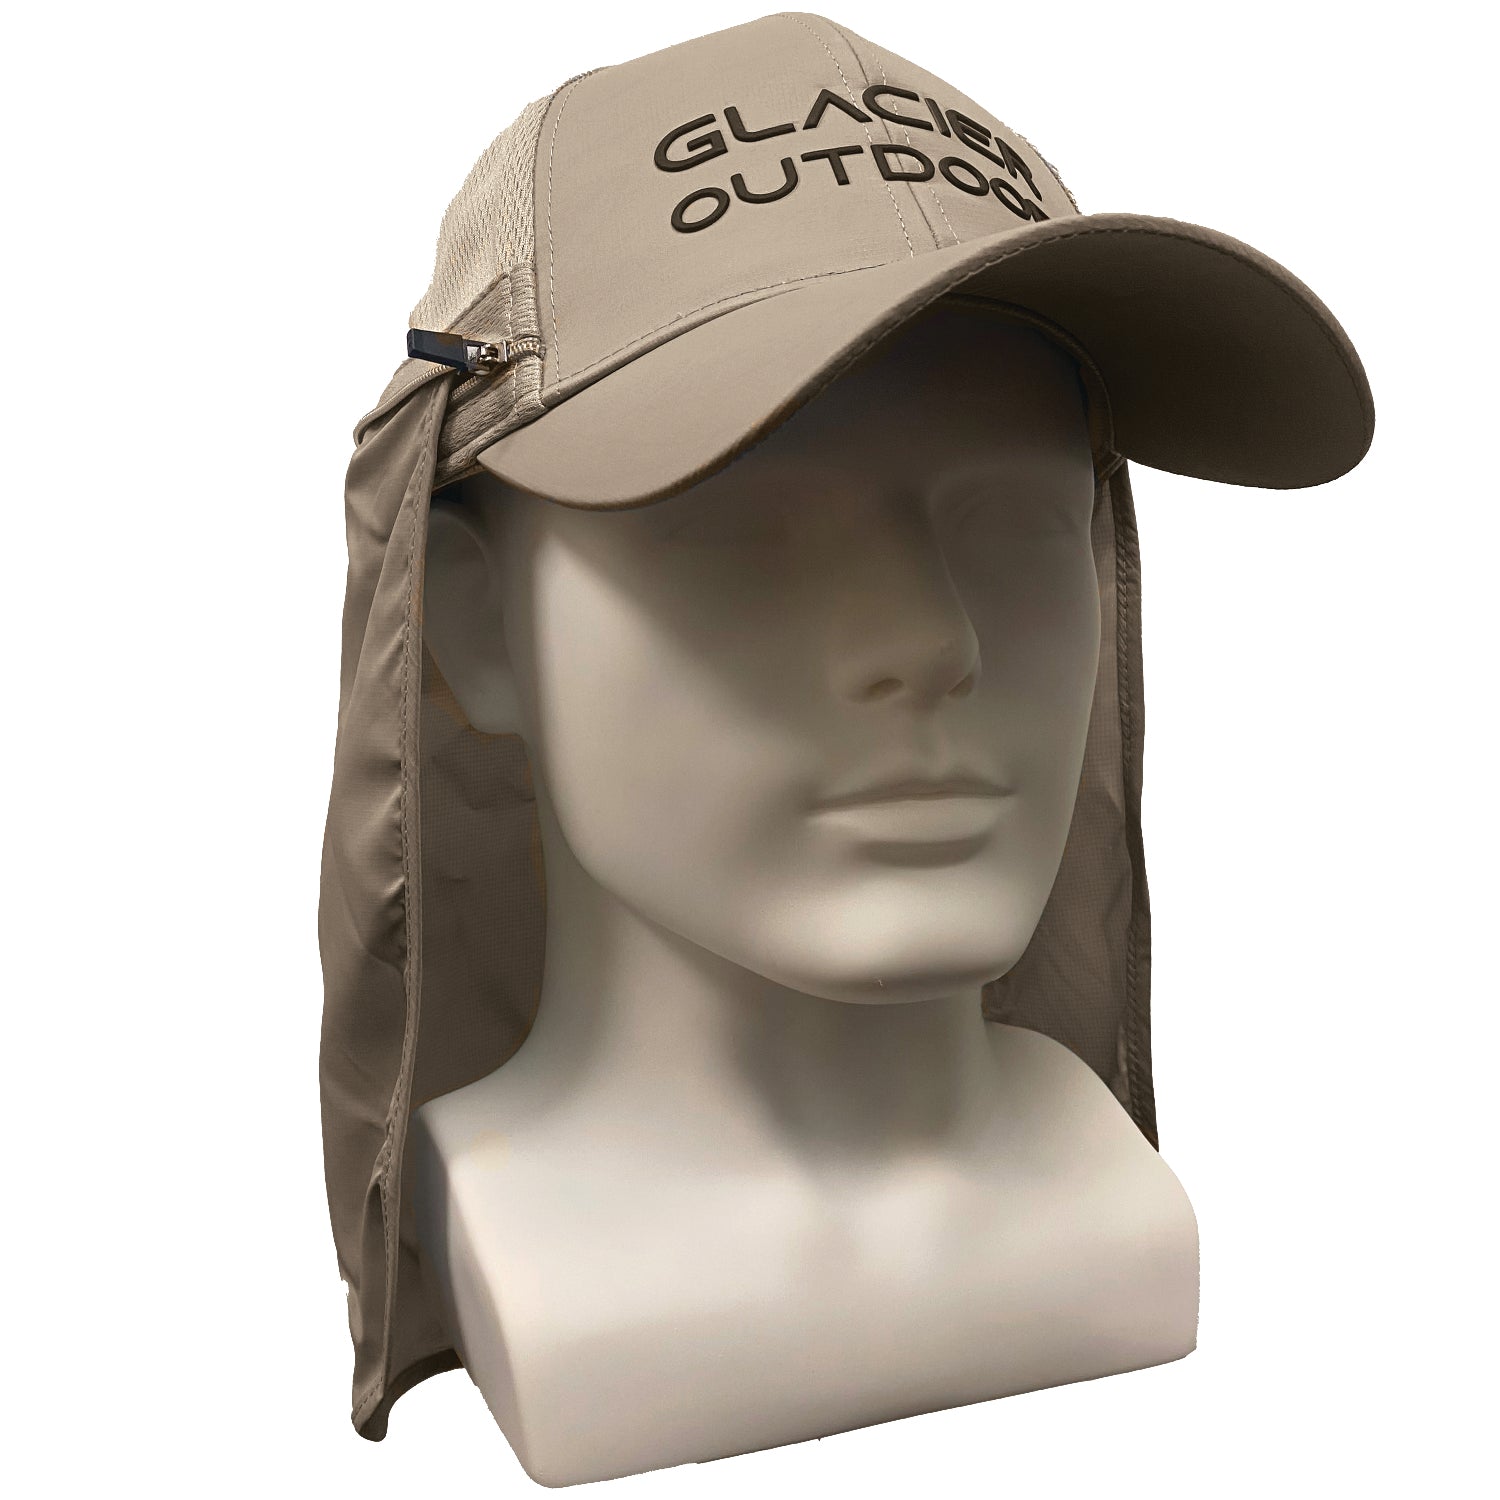 The Baja Convertible Hat boasts a unique design that allows it to effortlessly transform from a sun hat, providing ample protection from the scorching rays, to a stylish regular hat, perfect for any casual outing or adventure.